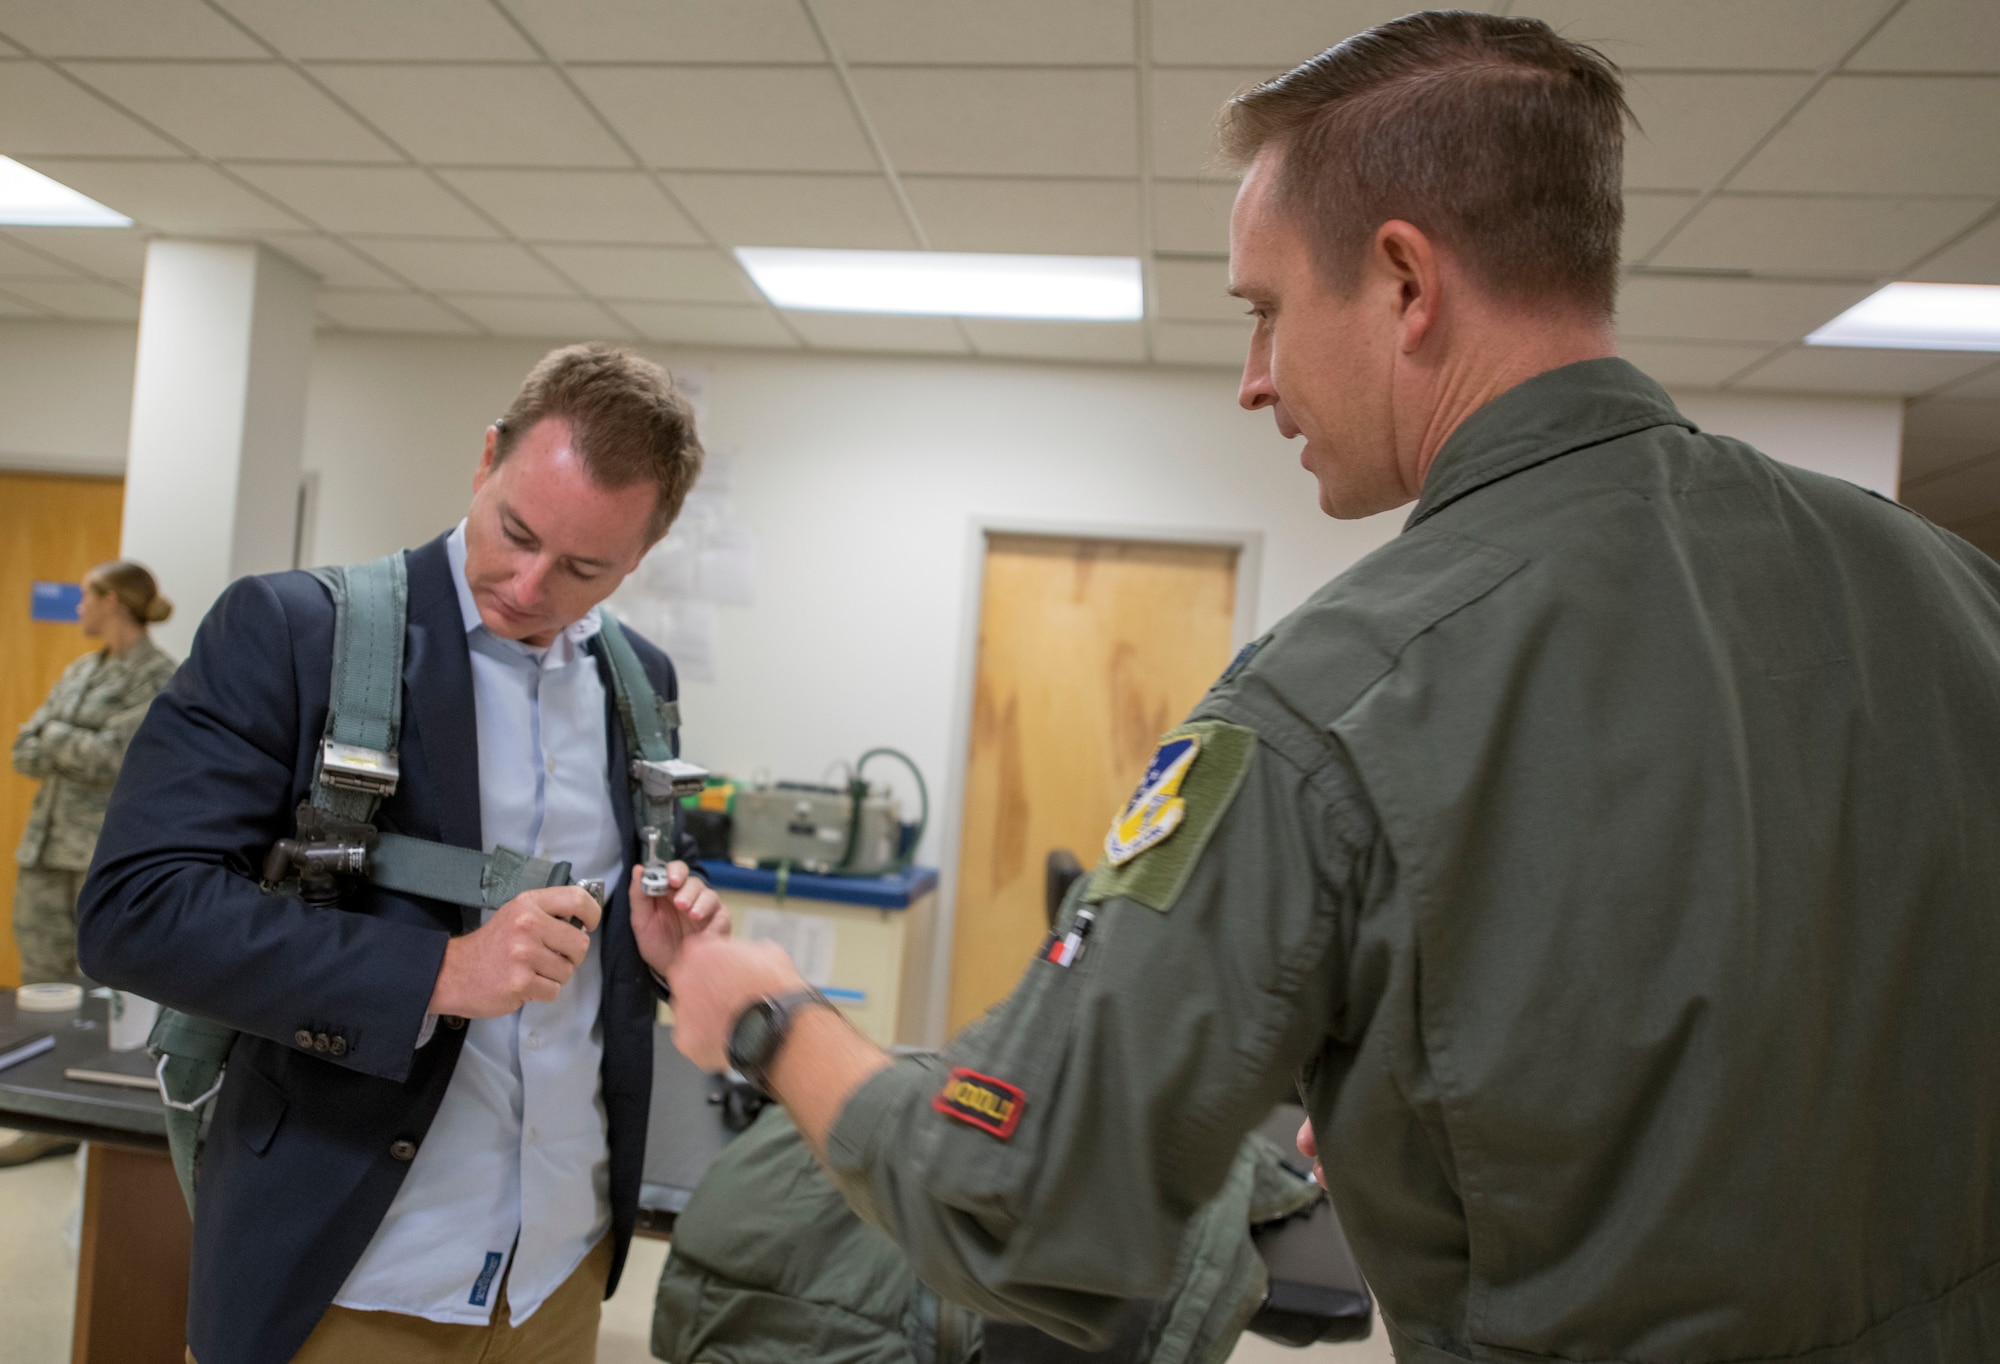 Lt. Col. Christopher Finch, 8th Fighter Squadron commander shows Sean Duggan, congressional staff for Senator Martin Heinrich, a pilot’s harness, Oct. 2, 2019, on Holloman Air Force Base, N.M. Staffers visited to understand the mission of the 49th Wing, which graduates combat ready aircrews and enabling support to various mission partners and tenant units. (U.S. Air Force photo by Staff Sgt. Christine Groening)